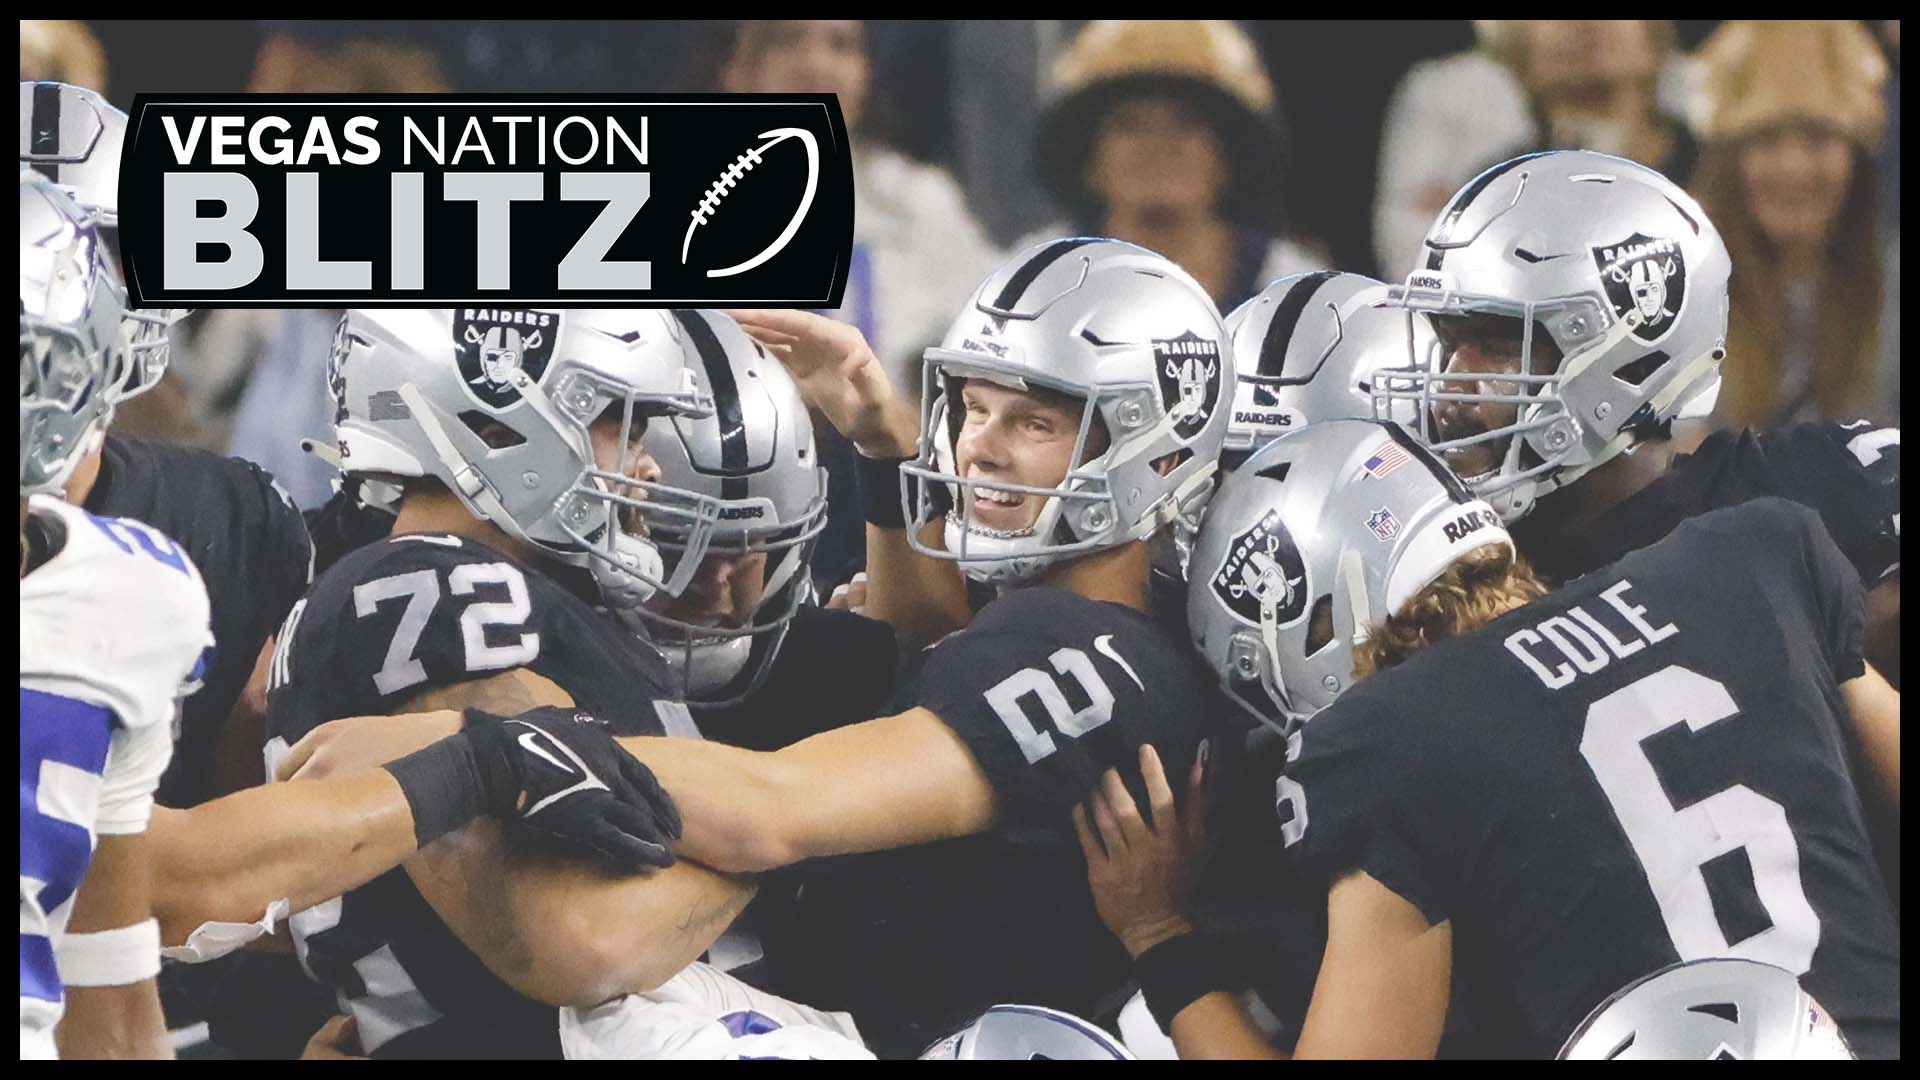 Raiders celebrate Thanksgiving with win over Cowboys | Vegas Nation Blitz